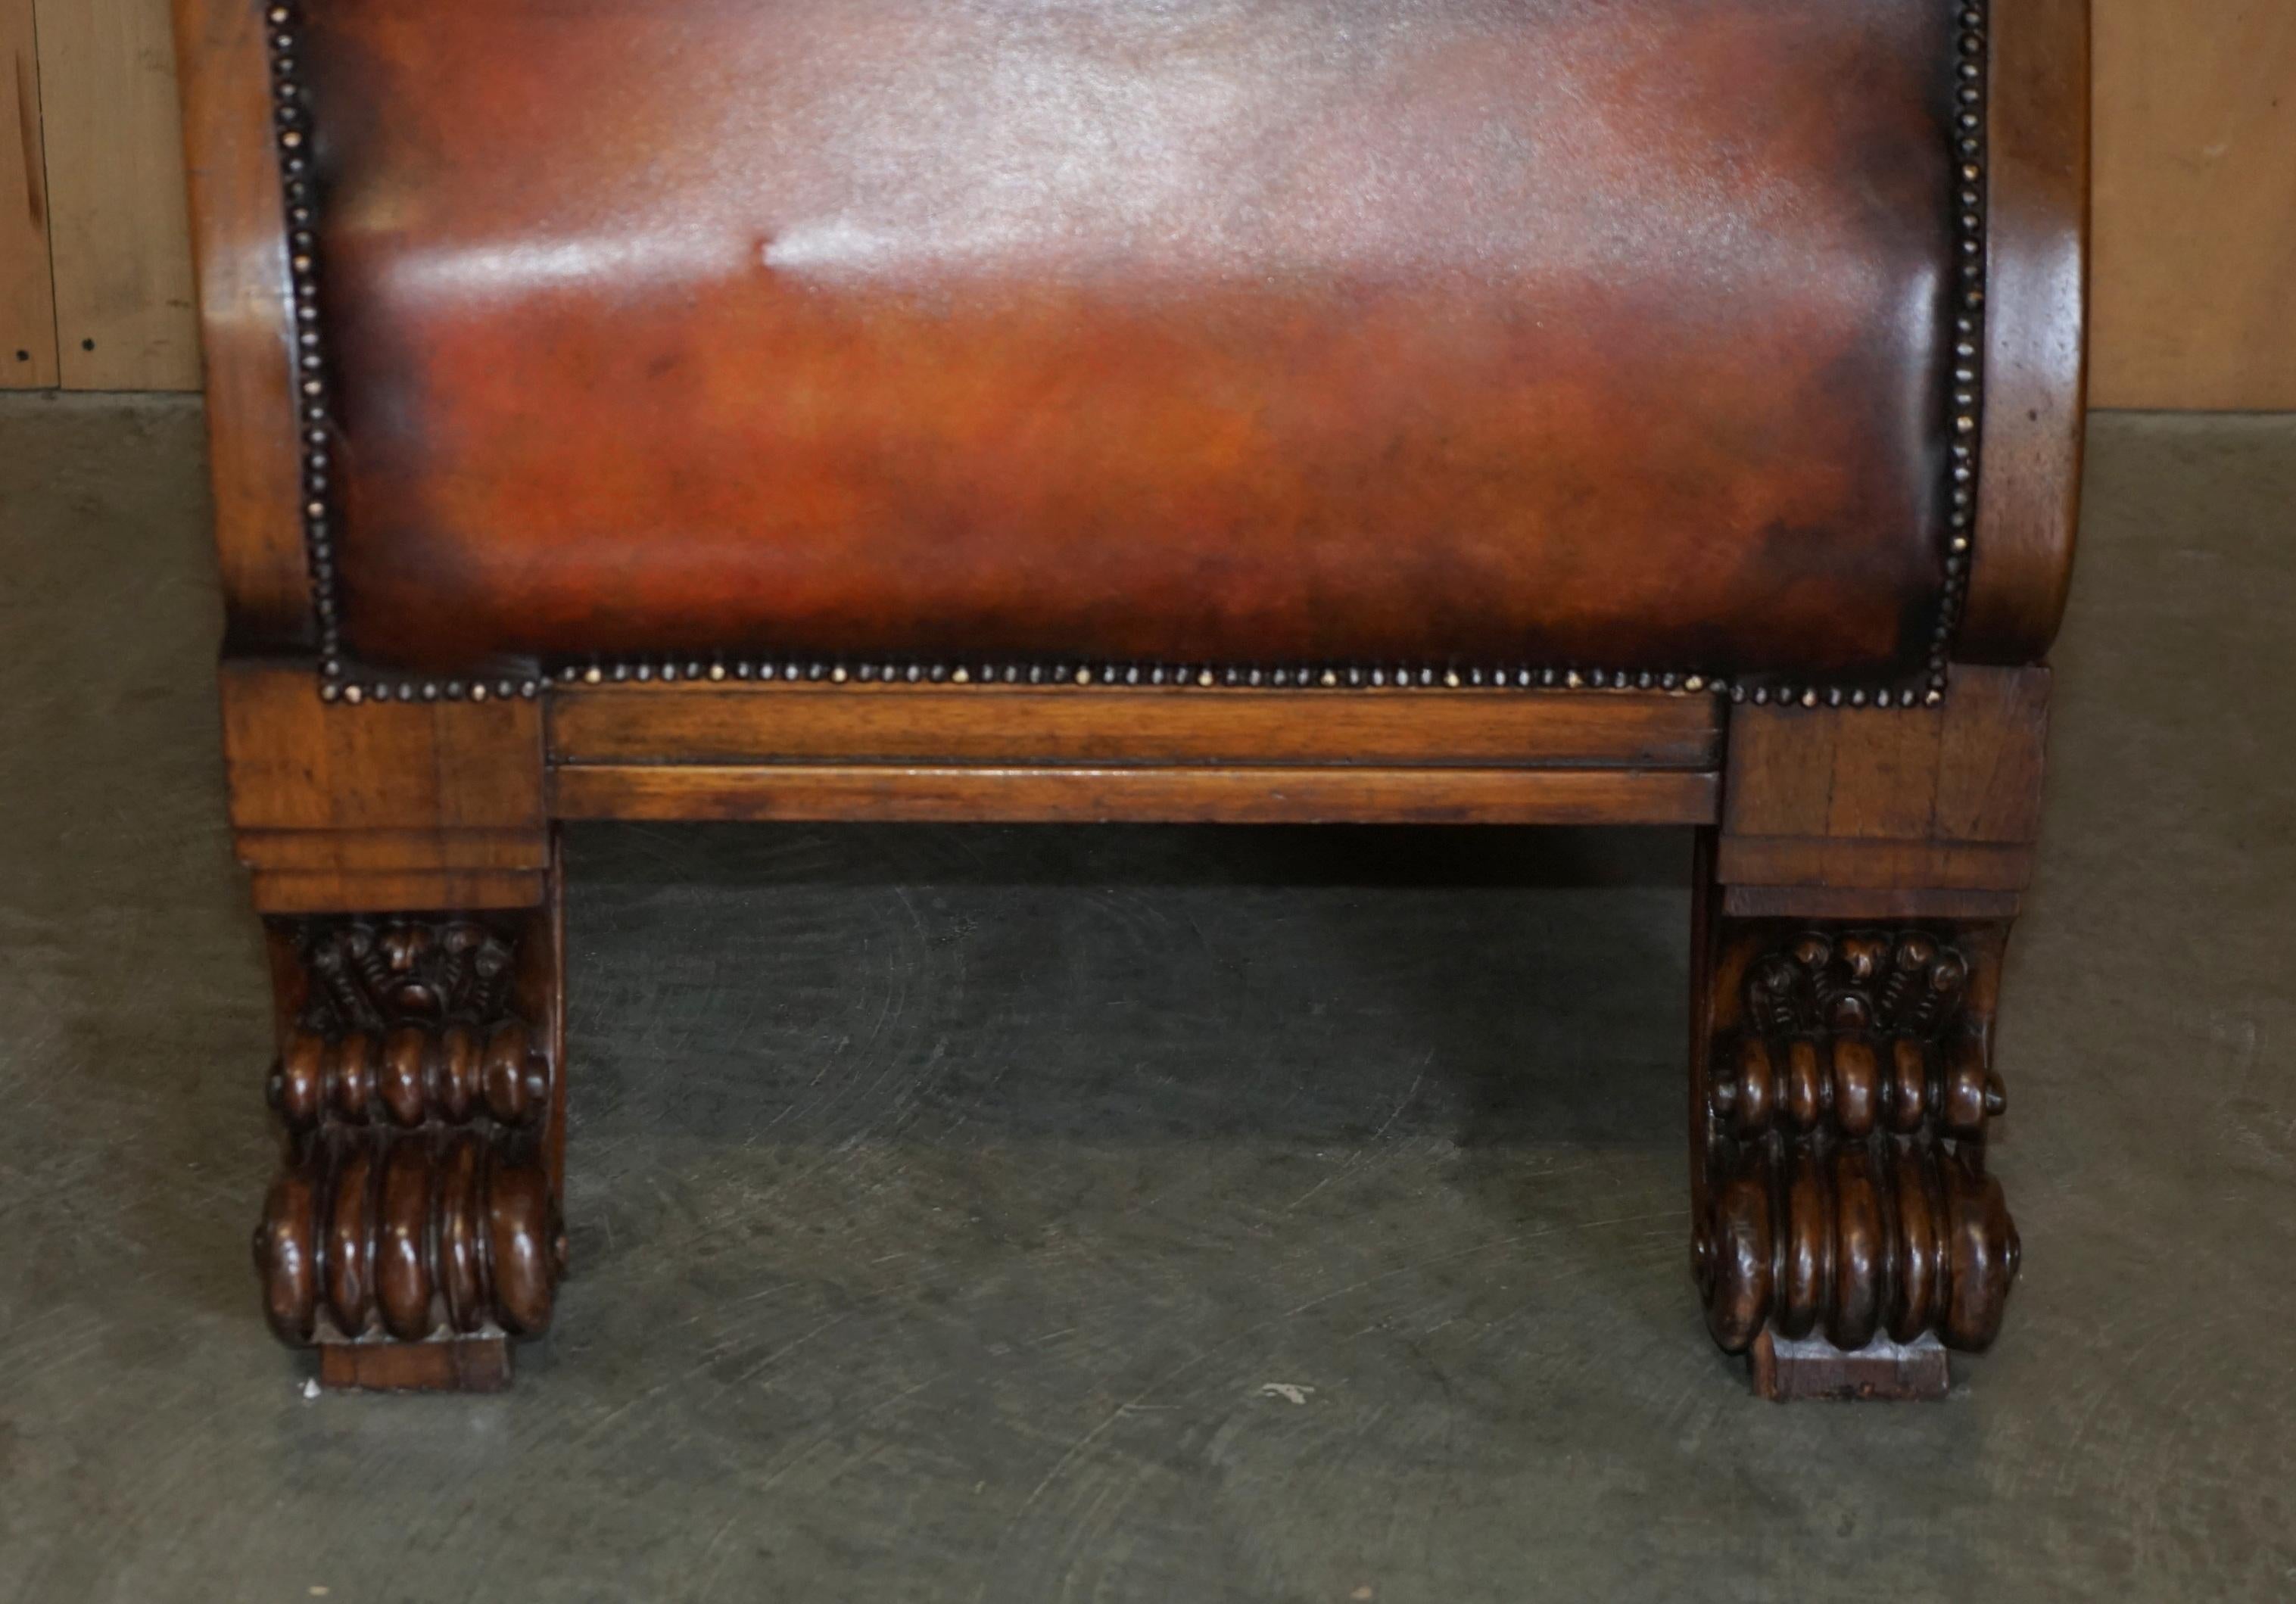 HUGE ORNATELY CARved ANTiQUE FULLY RESTORED CHESTERFIELD KING / QUEENS ARMCHAIR im Angebot 10